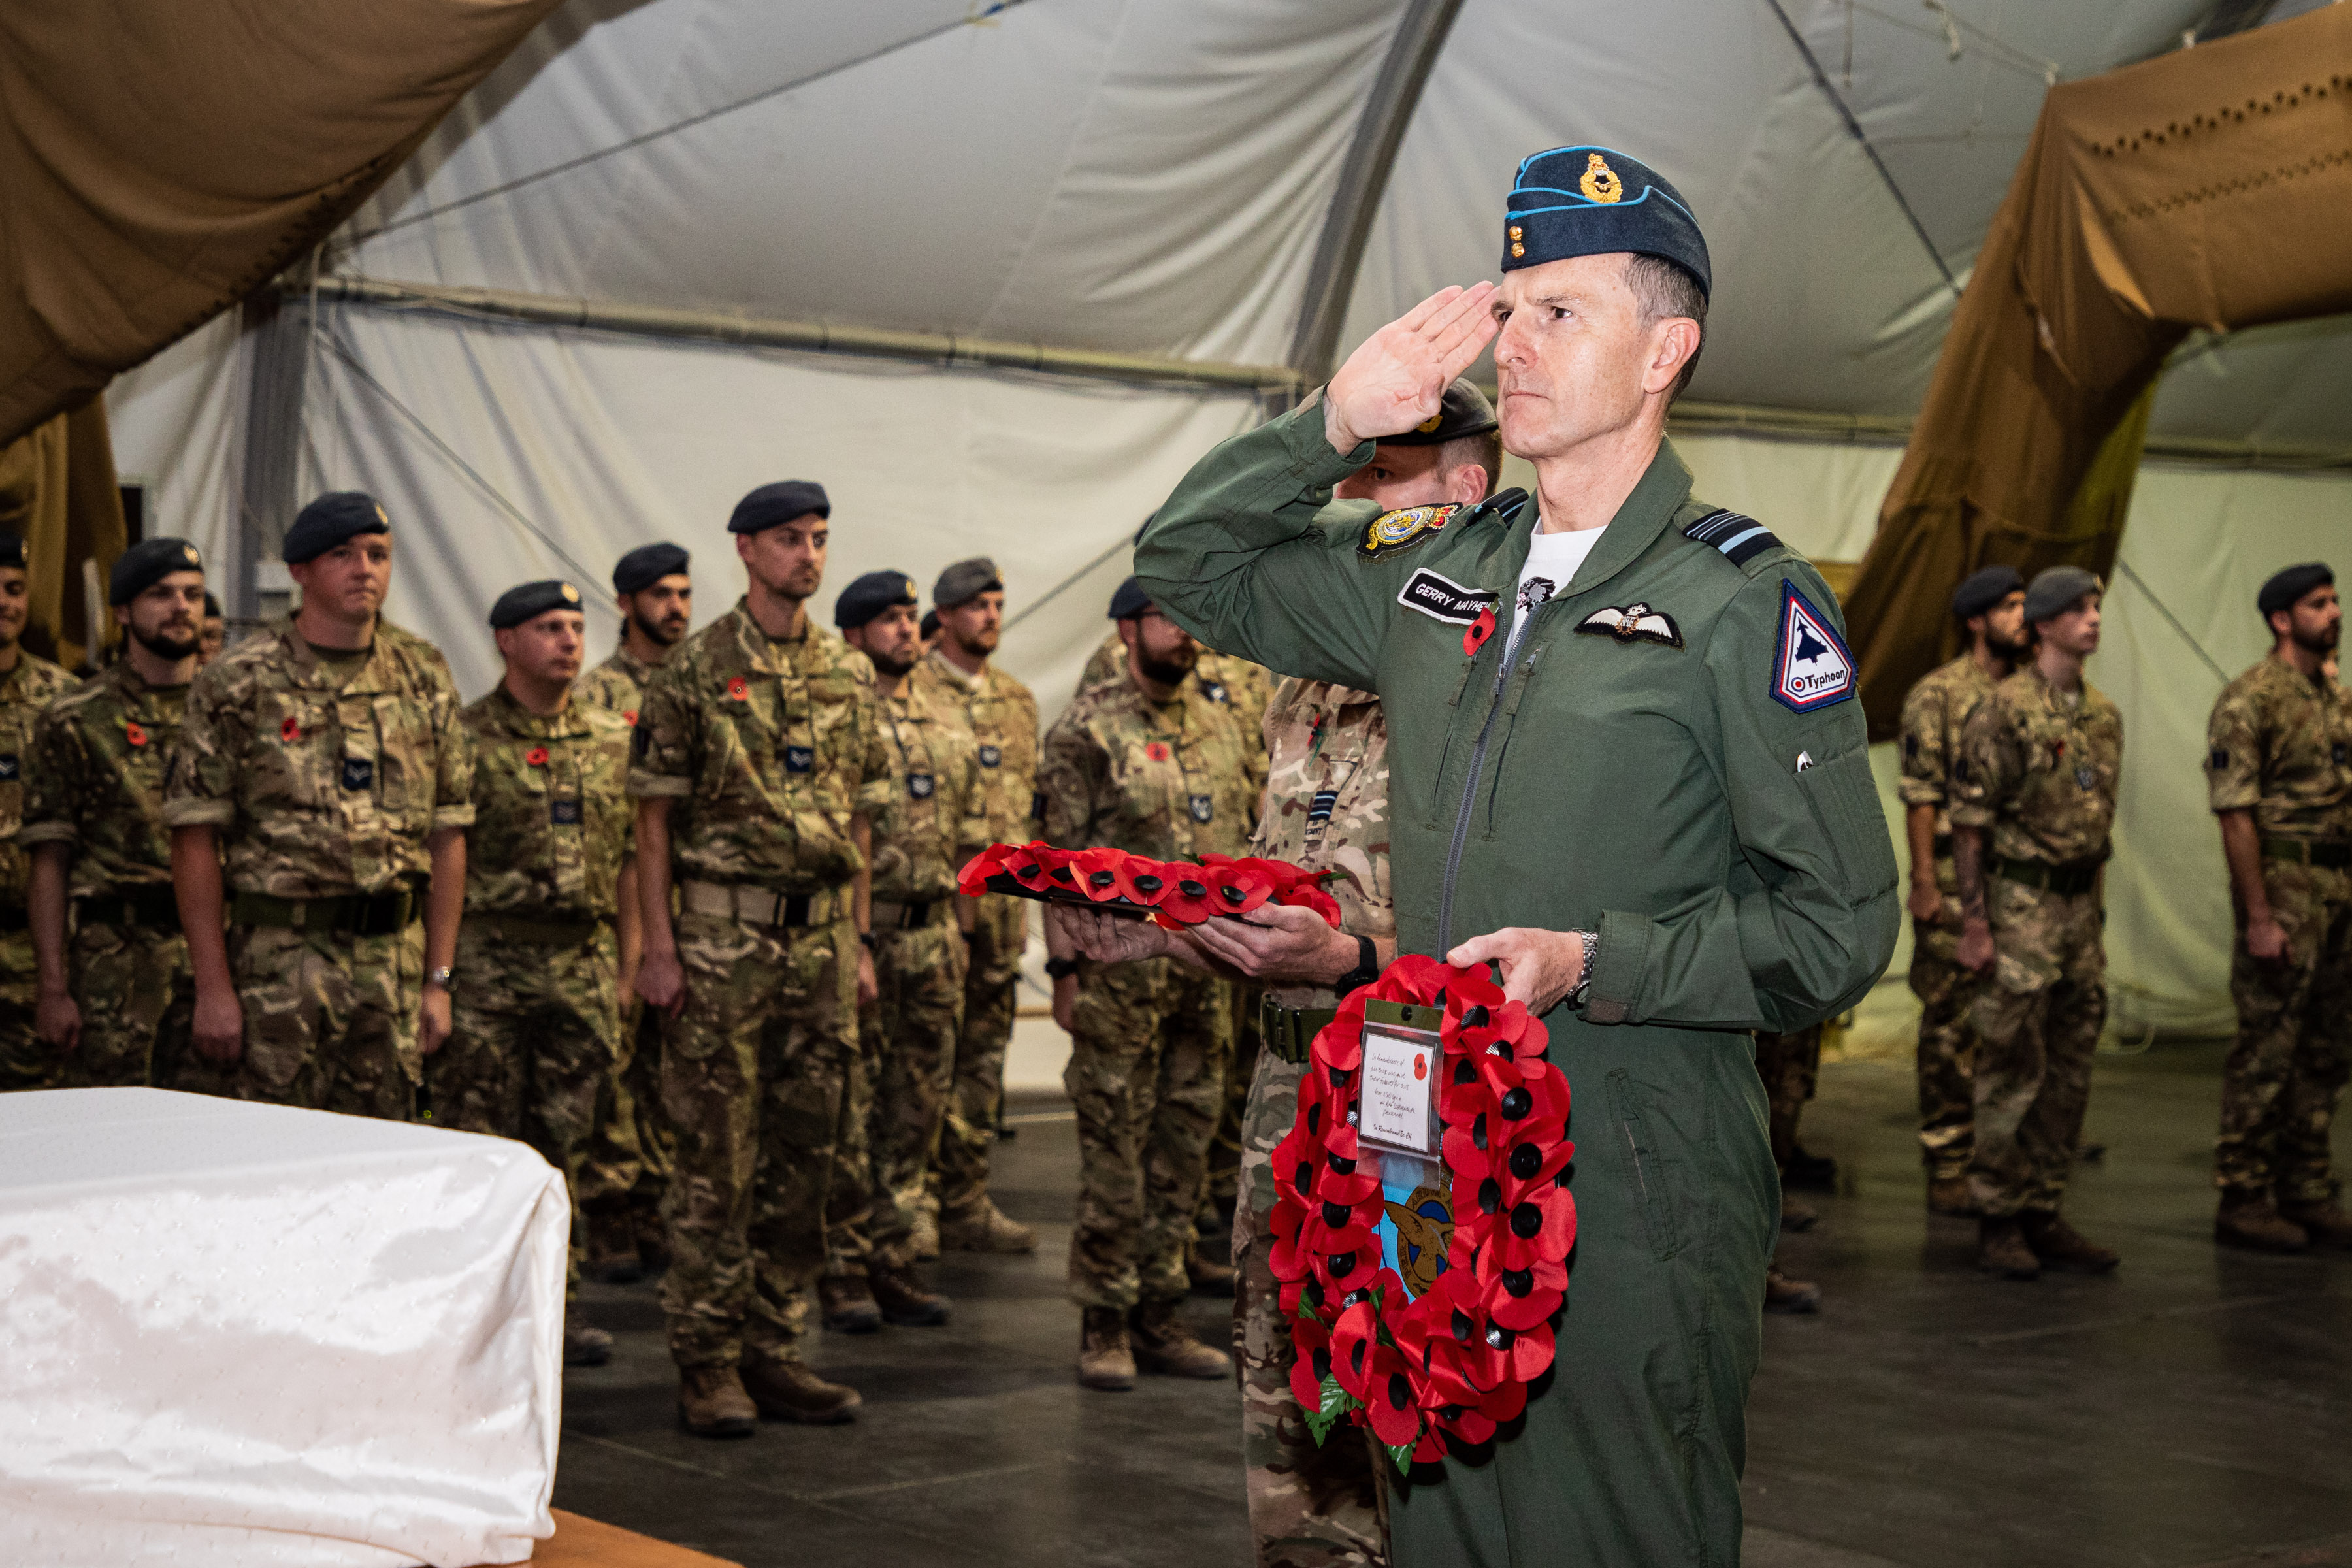 Personnel stand inside tent, with Air Marshal Mayhew saluting as he lays poppy wreaths.